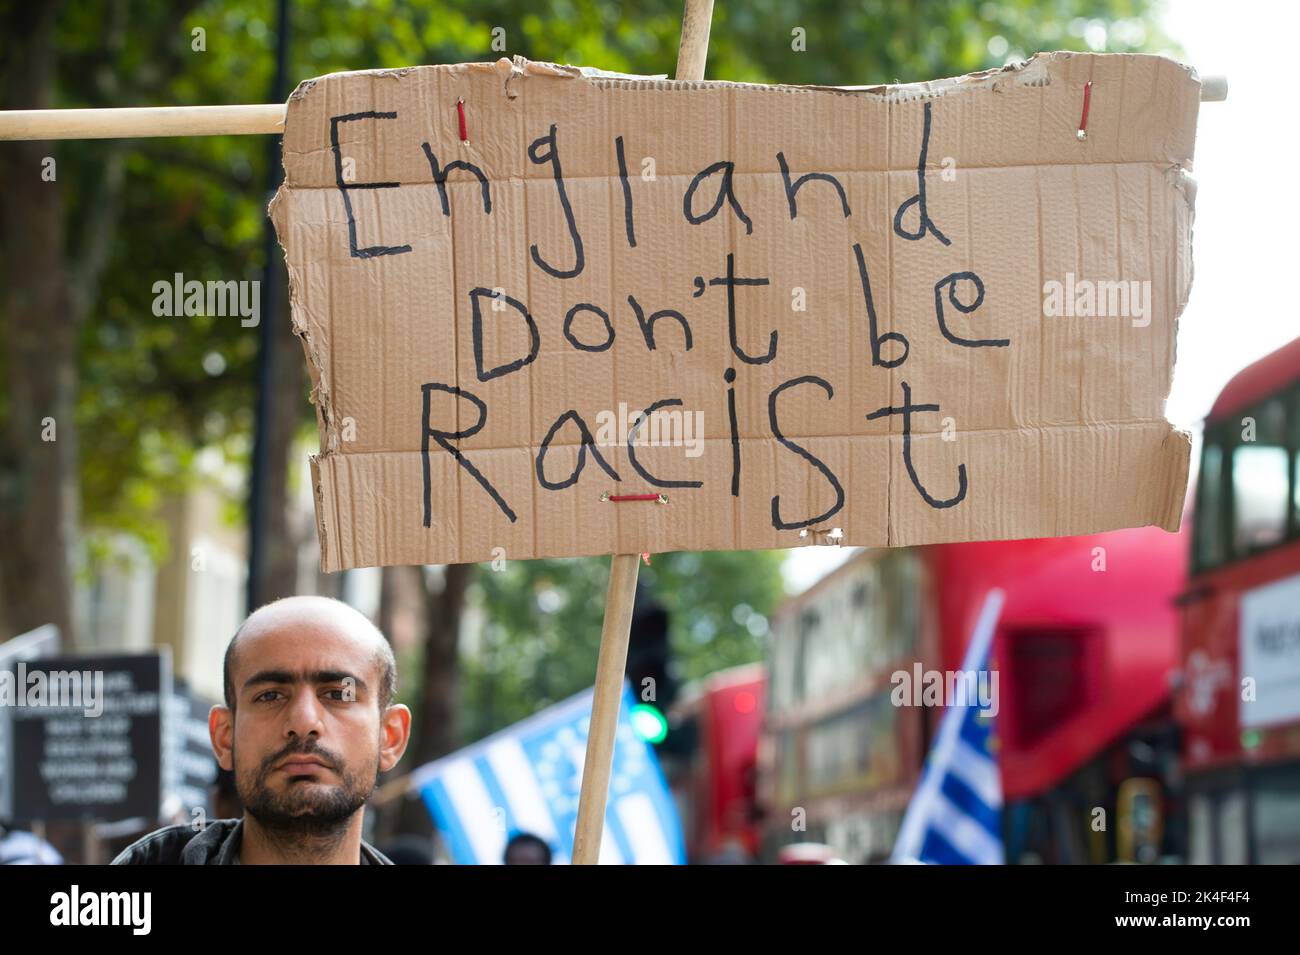 London. Whitehall. A lone protester carries a hand made sign saying 'England dont be racist'. Stock Photo